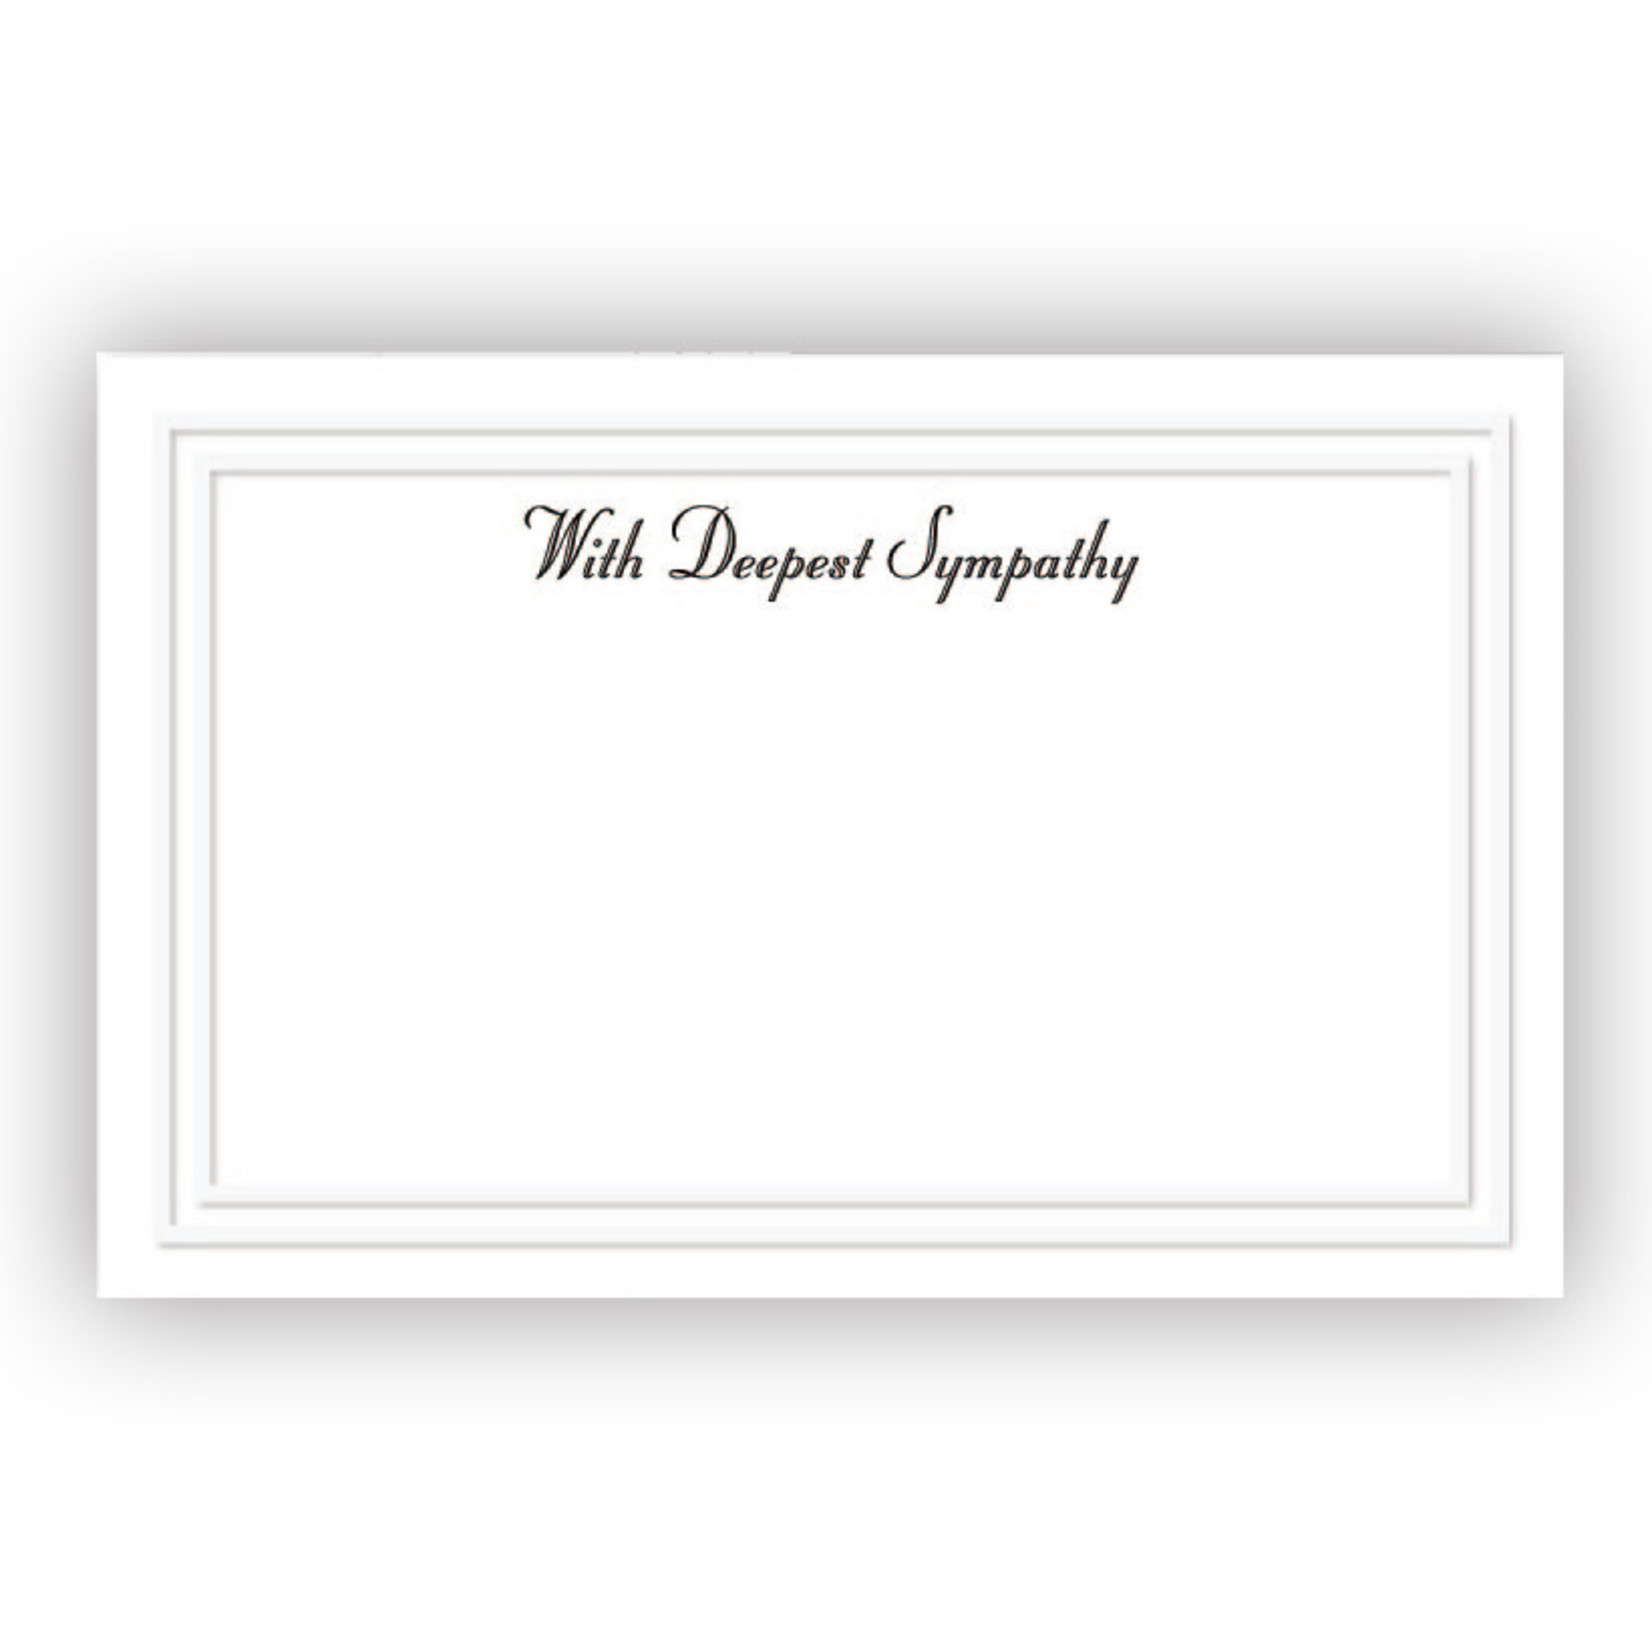 With Deepest Sympathy - Single Panel White - Funeral Home Details on Back